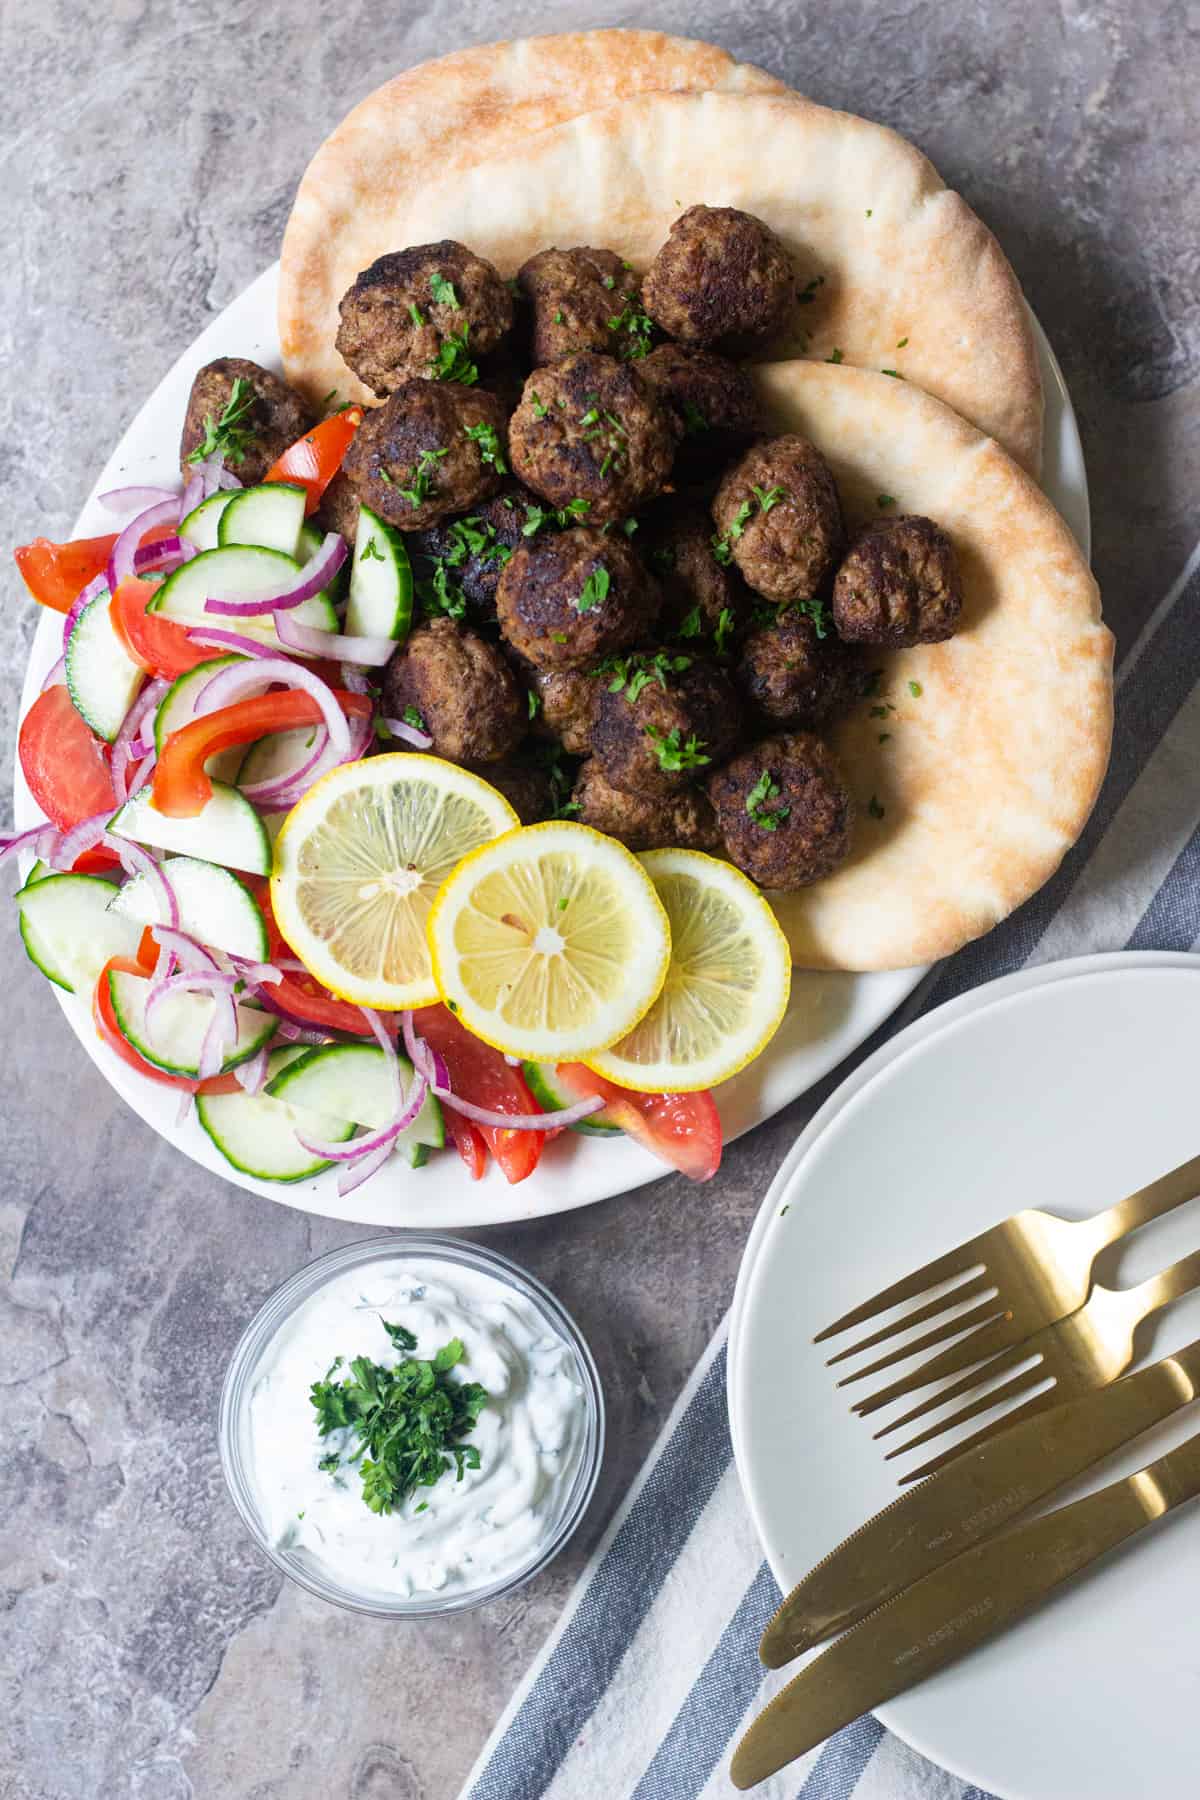 Serve Greek lamb meatballs with pitas and vegetables.